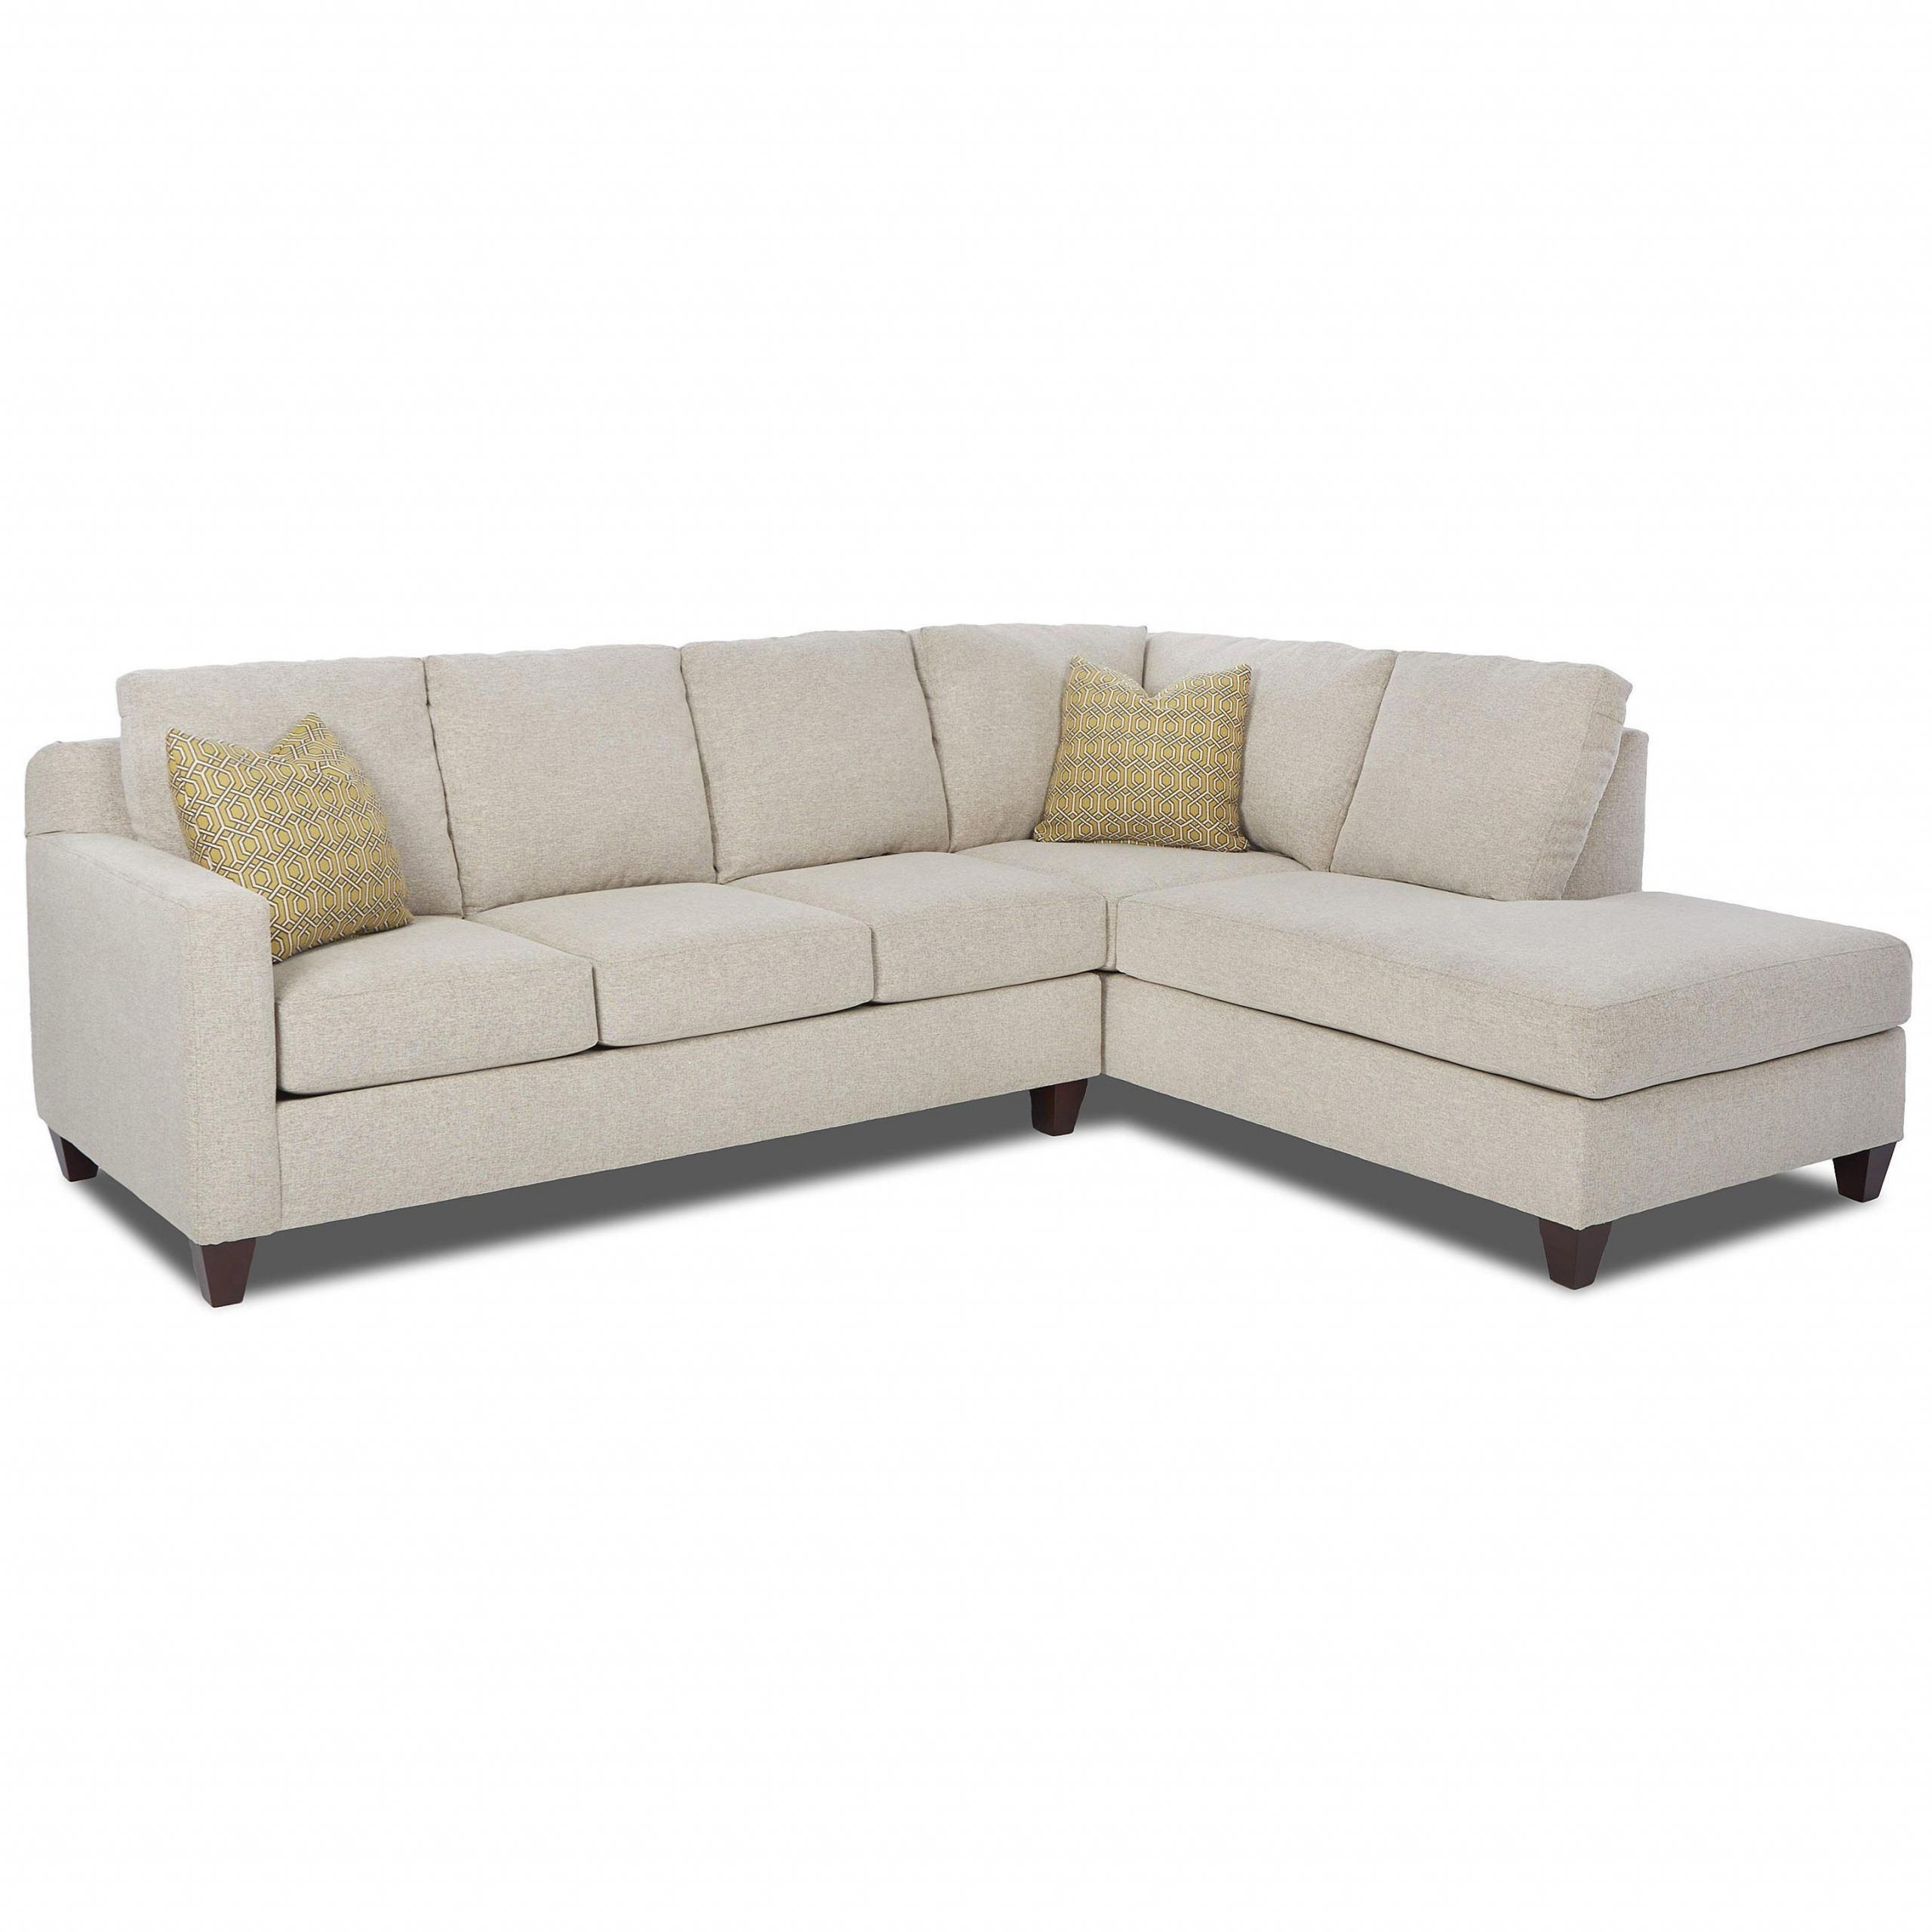 Klaussner Bosco Contemporary 2 Piece Sectional With Left With Best And Newest Hannah Left Sectional Sofas (View 7 of 25)